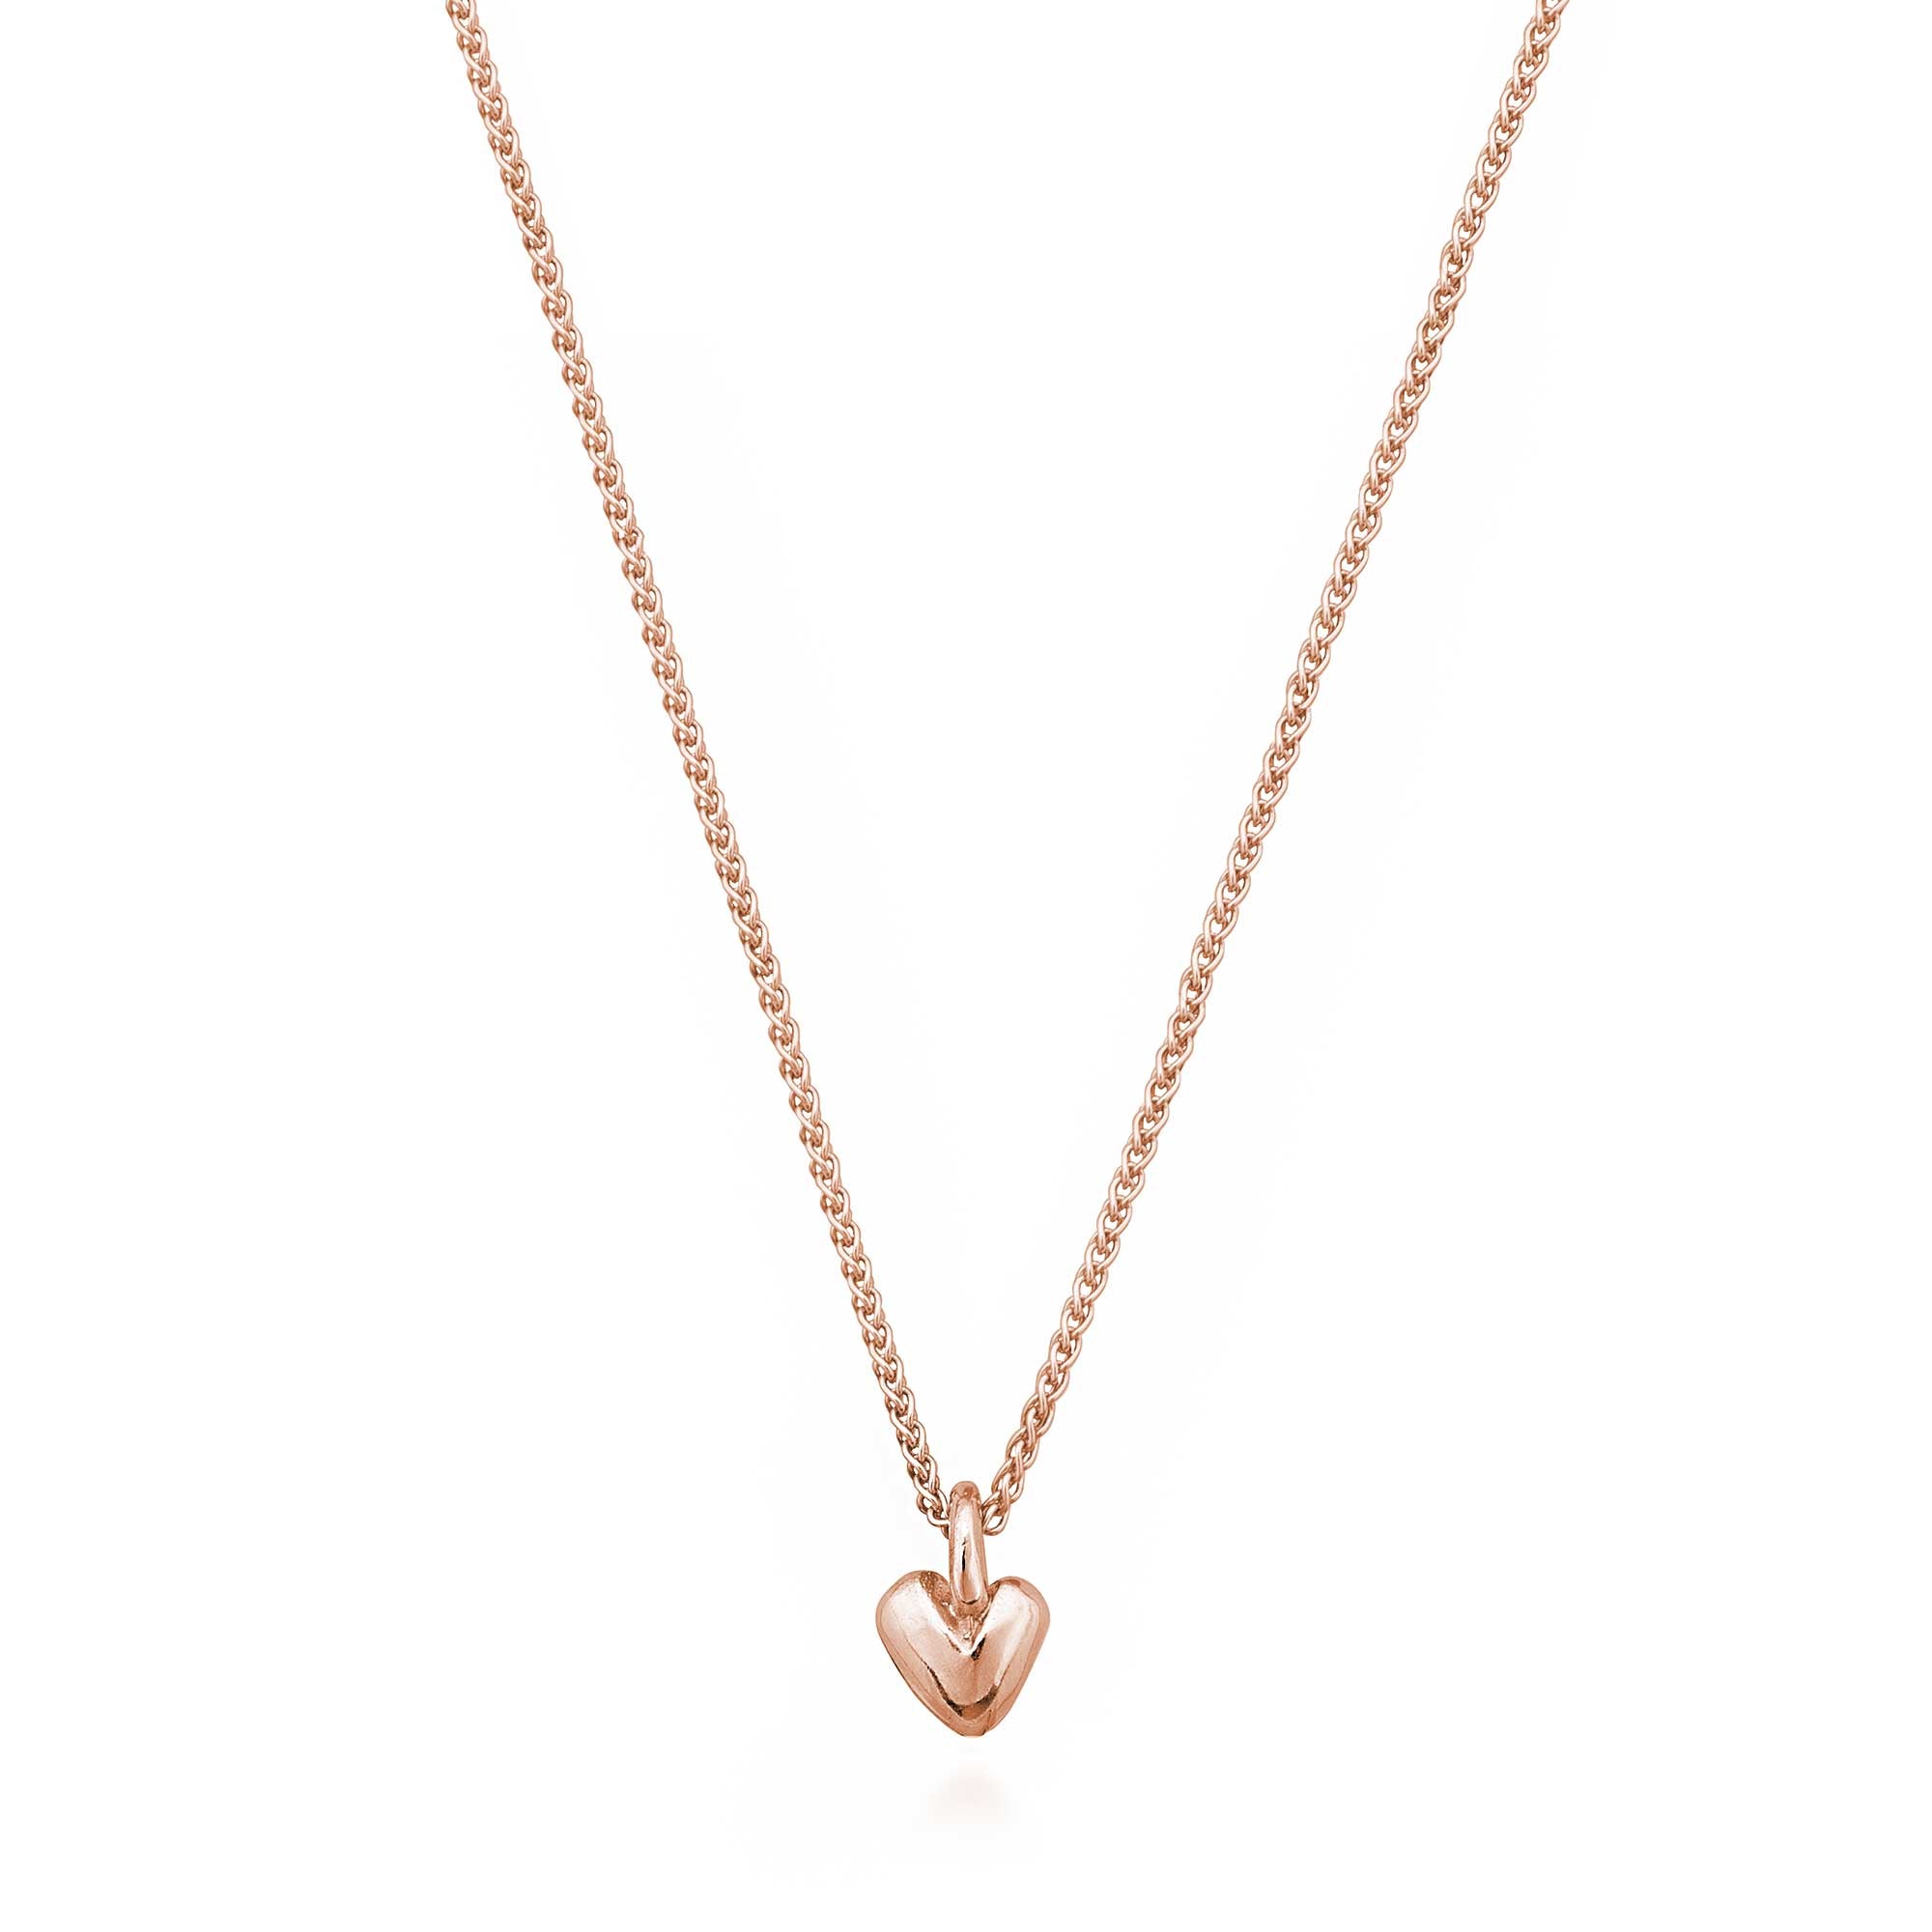 Solid rose gold recycled heart pendant Scarlett Jewellery UK Slow fashion trends